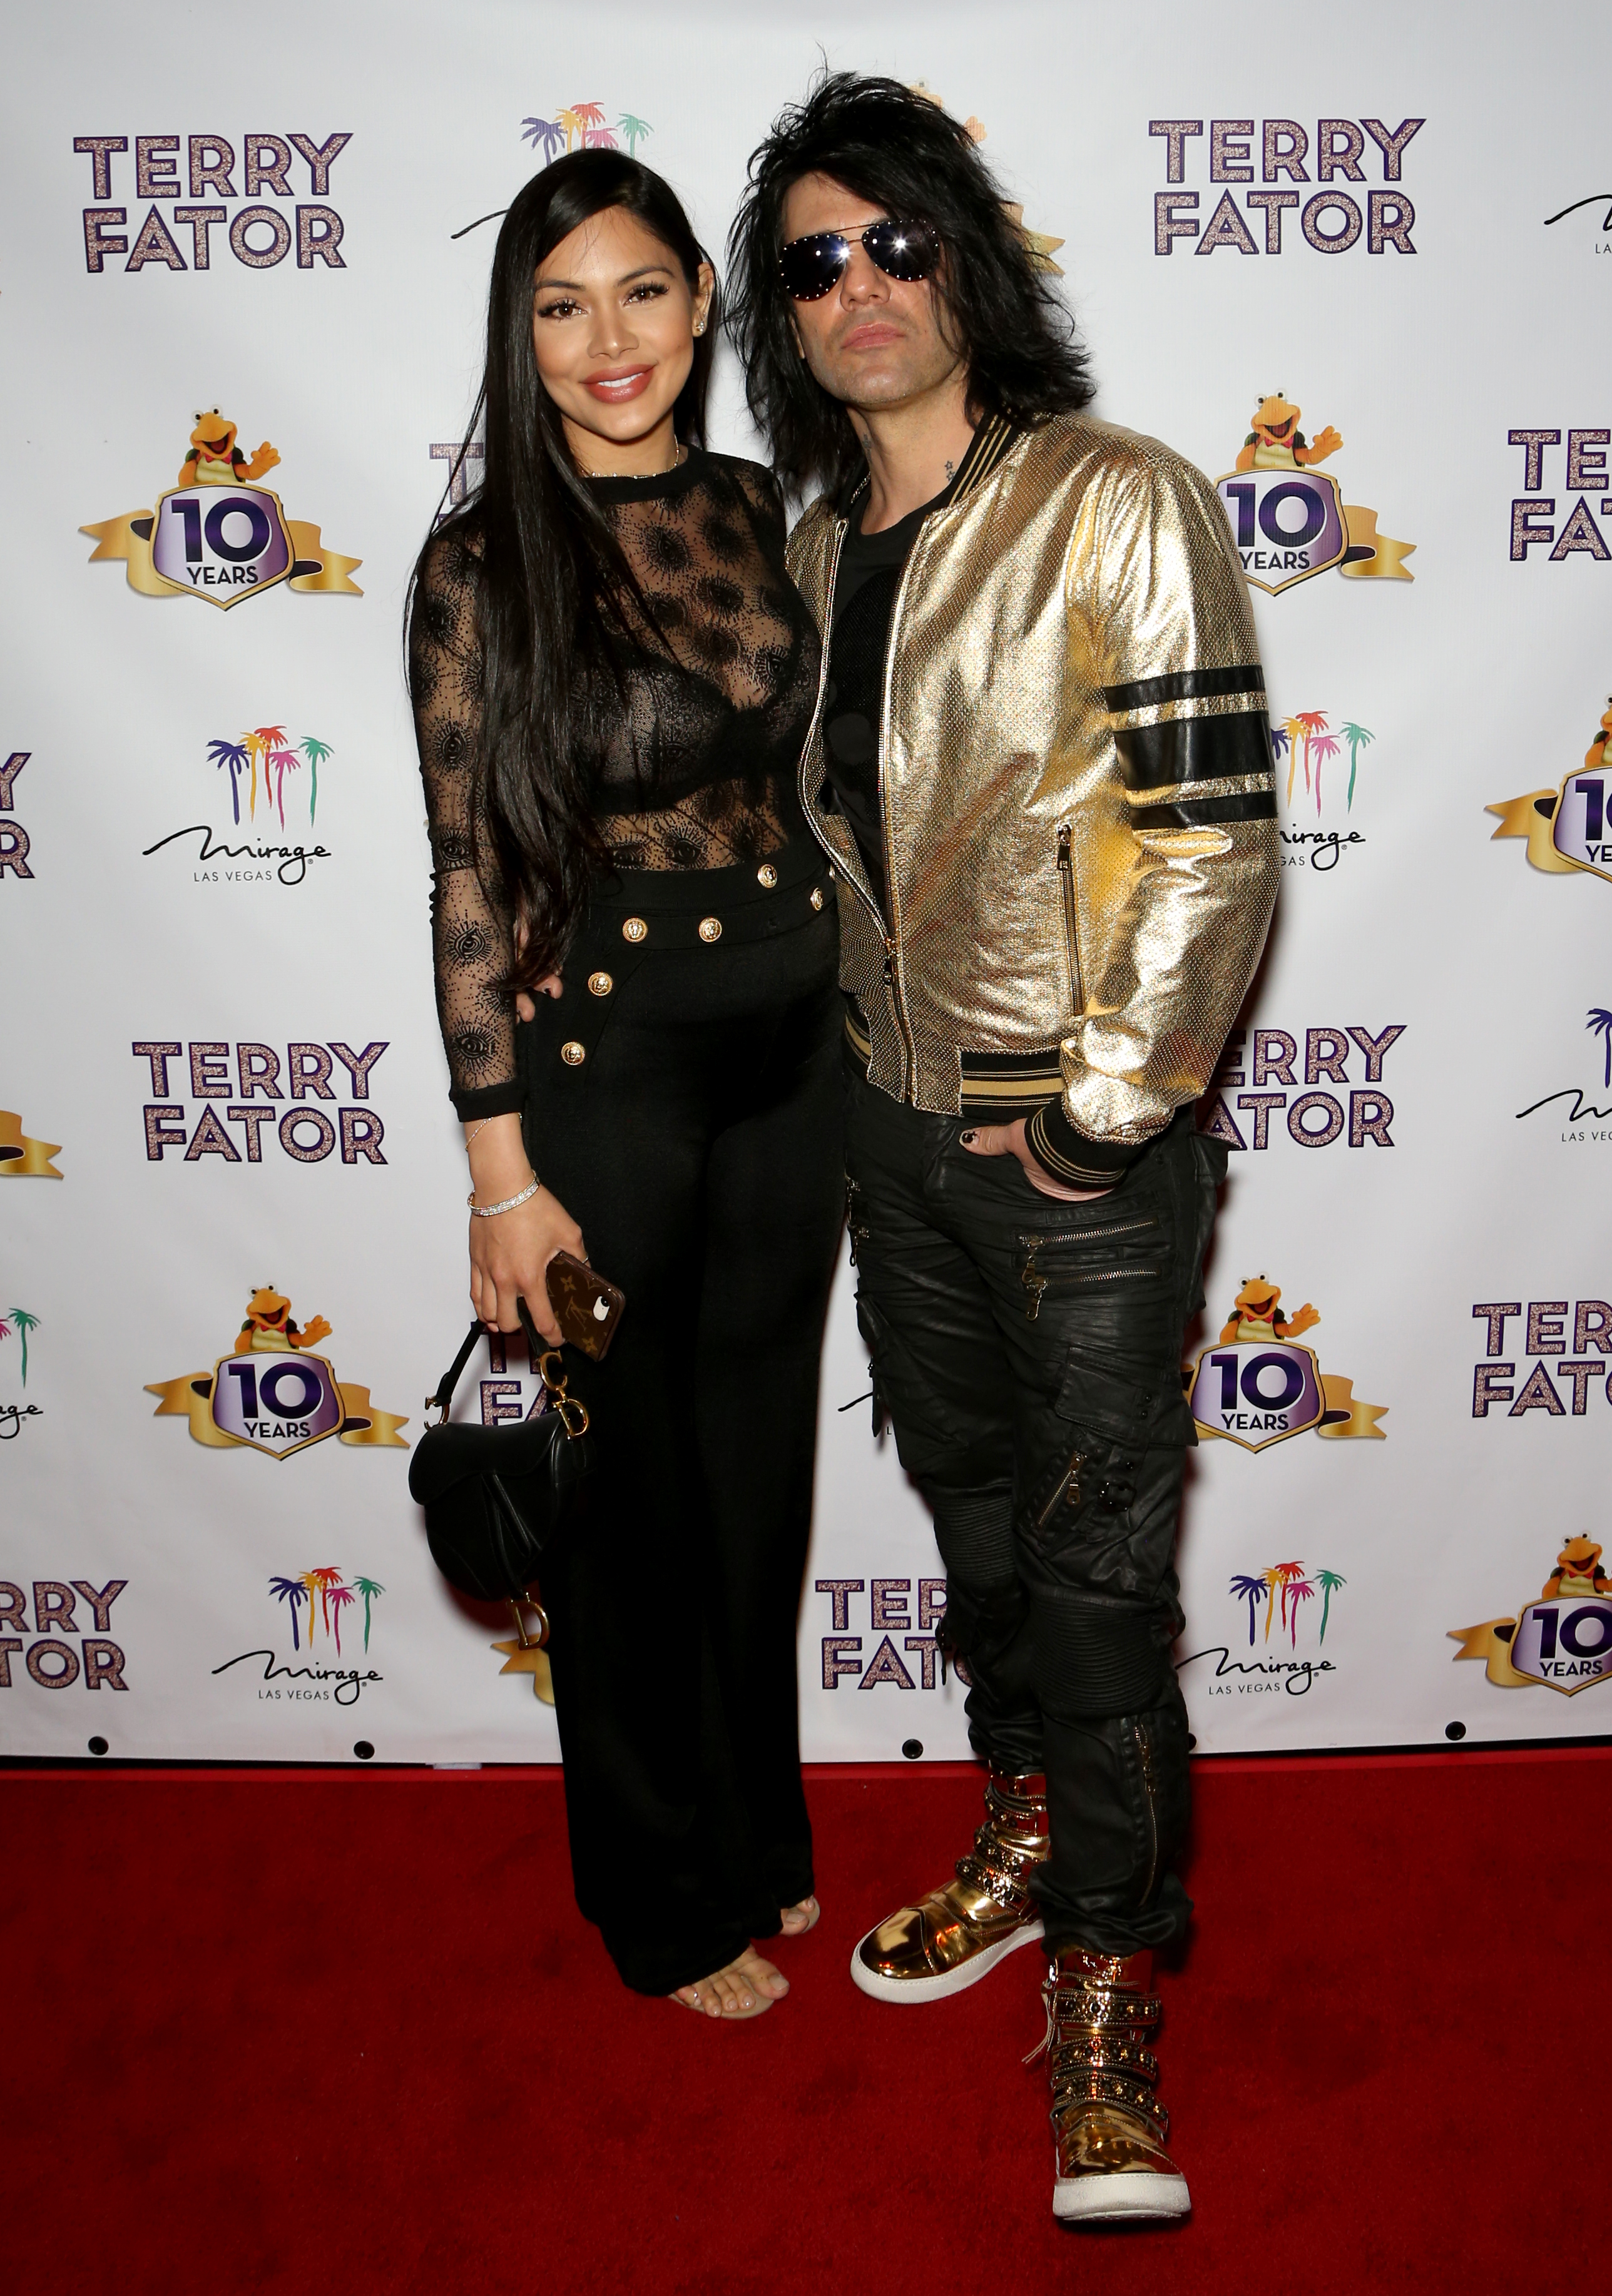 Illusionist Criss Angel and his wife Shaunyl Benson at The Mirage Hotel & Casino on March 15, 2019, in Las Vegas, Nevada. | Source: Getty Images